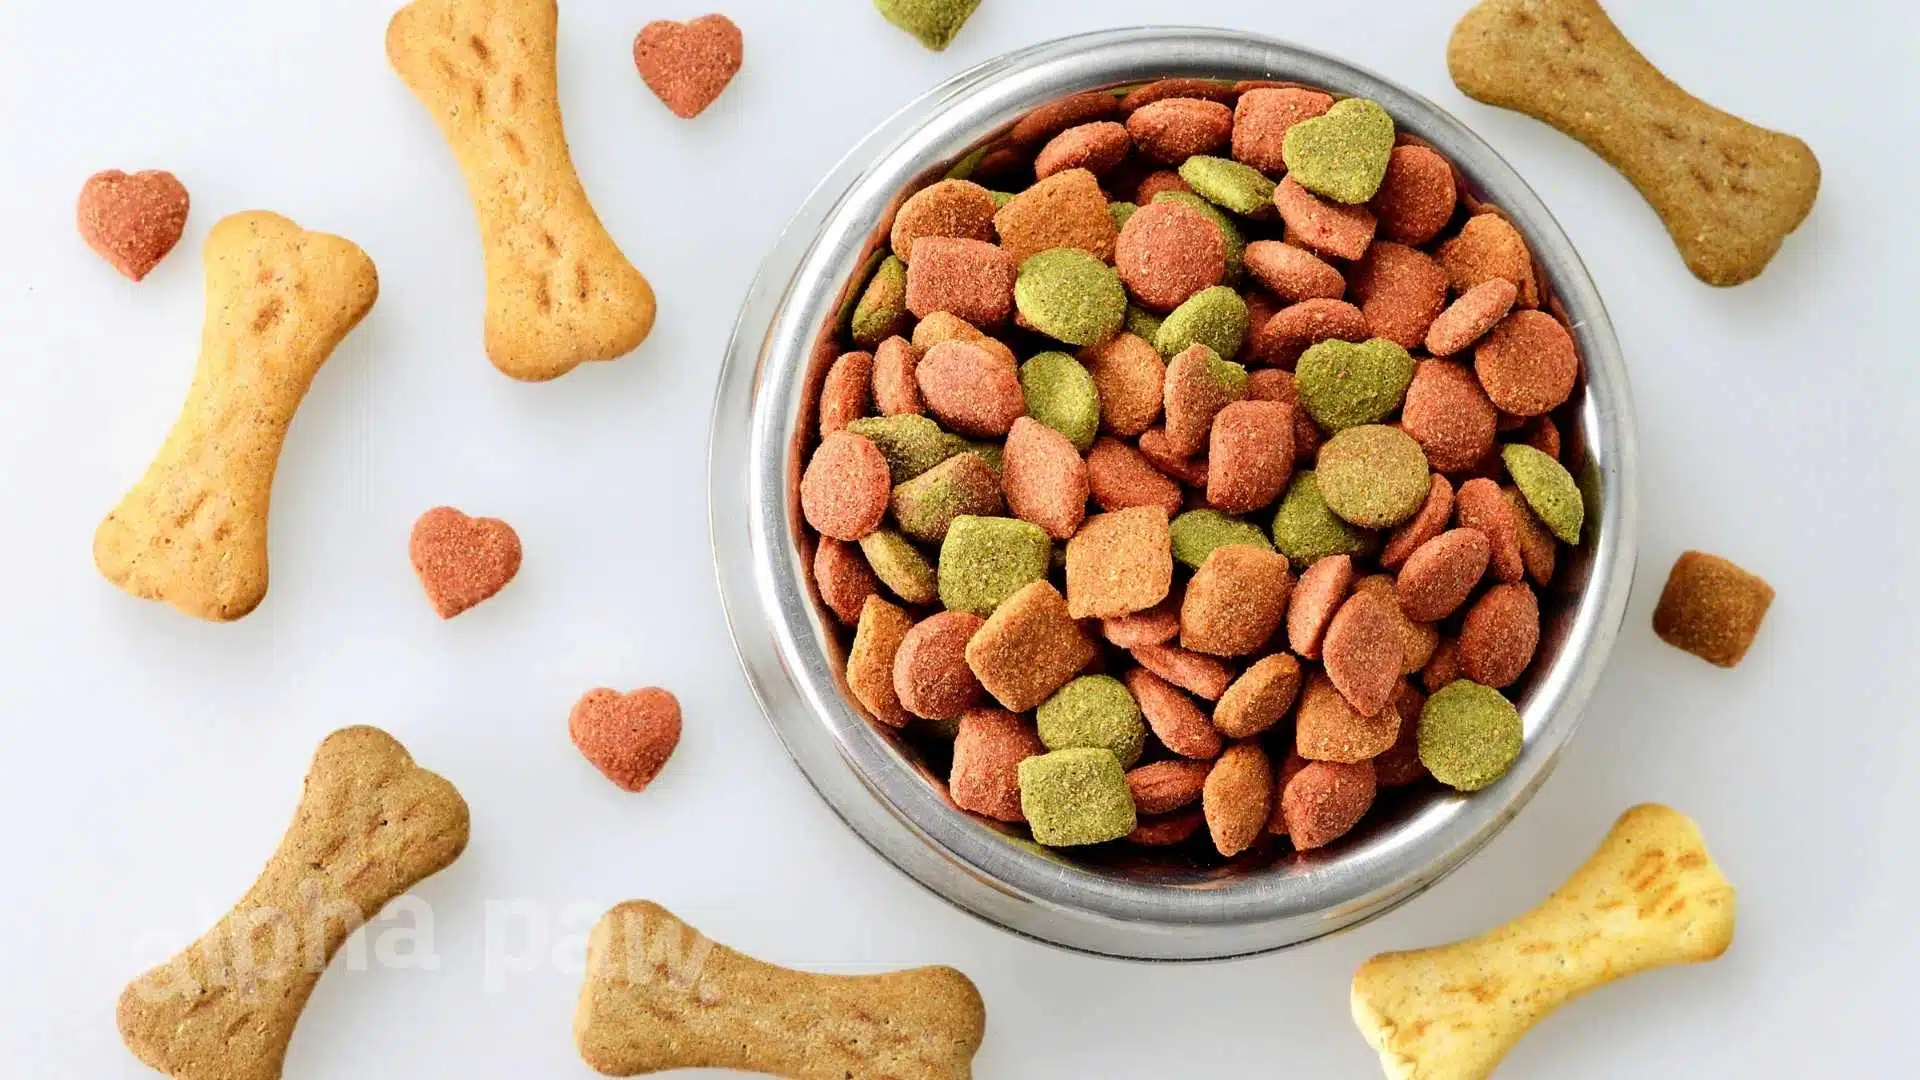 Ingredients to Avoid in Dog Food: The Shakedown